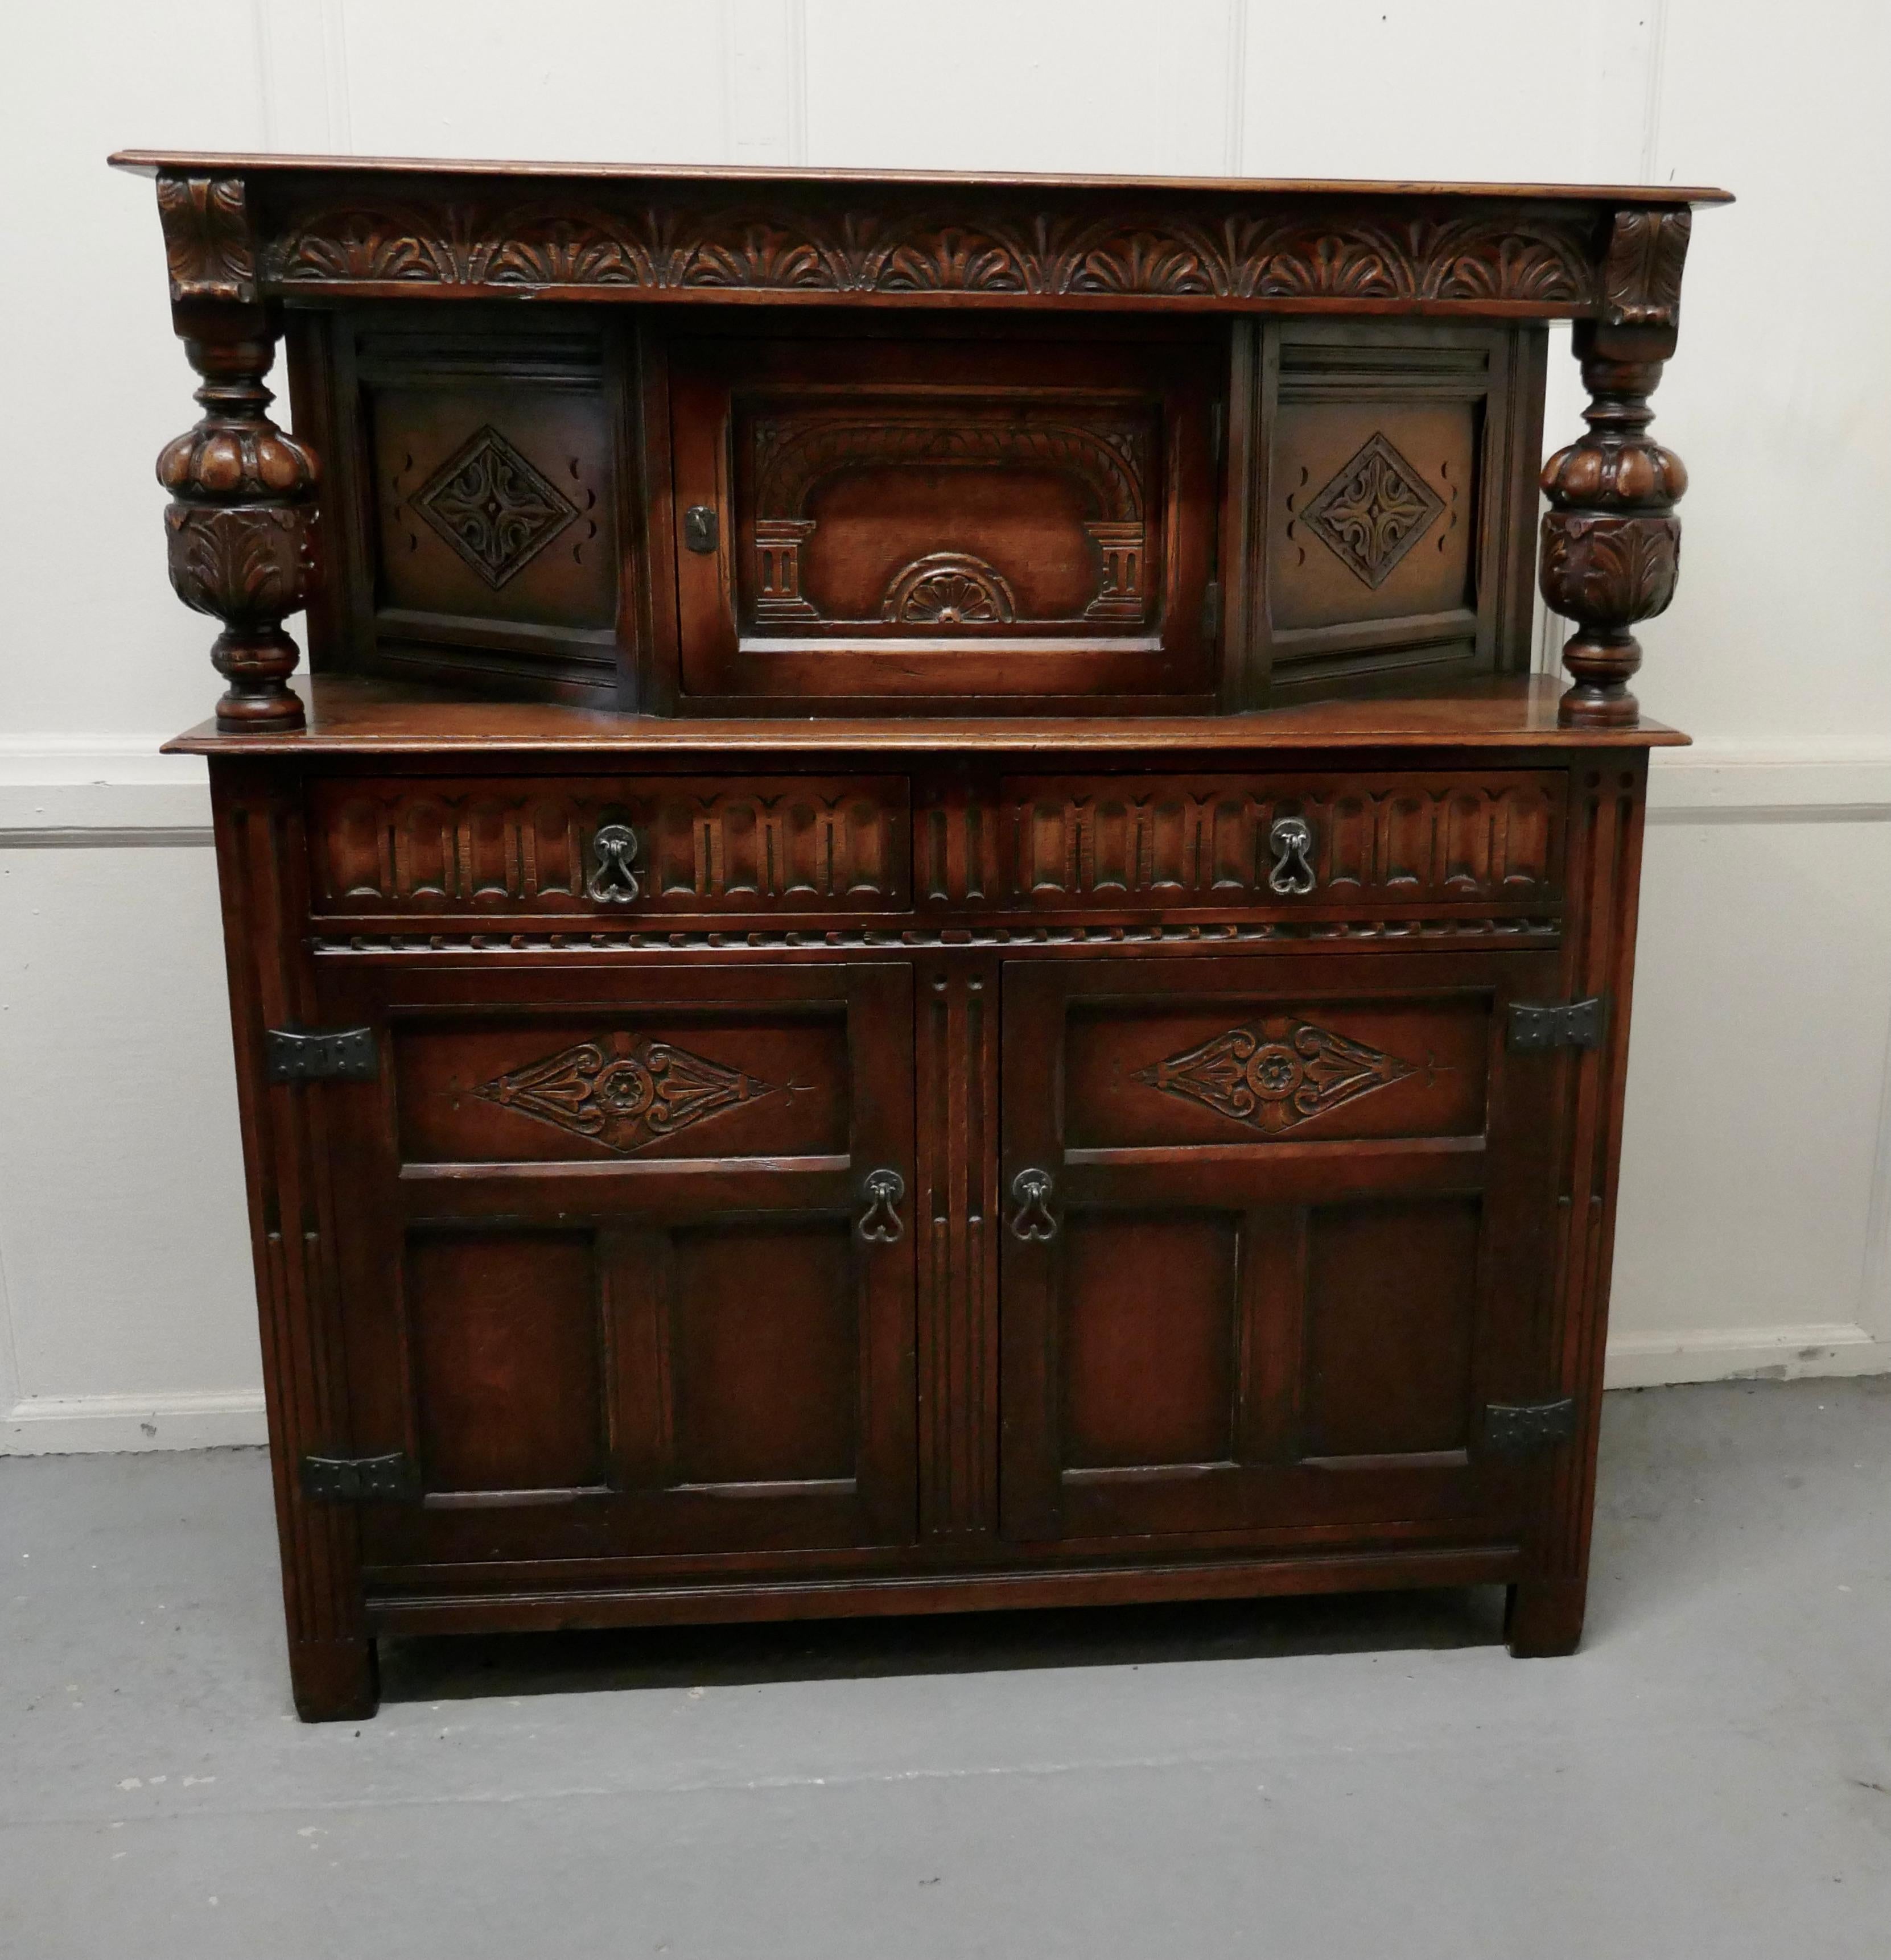 19th century Arts & Crafts Gothic carved oak court cupboard

This is a very attractive piece of carved oak furniture, the top section has a long cupboard enclosed with a carved panels and door in the centre
On each side there is a chunky carved